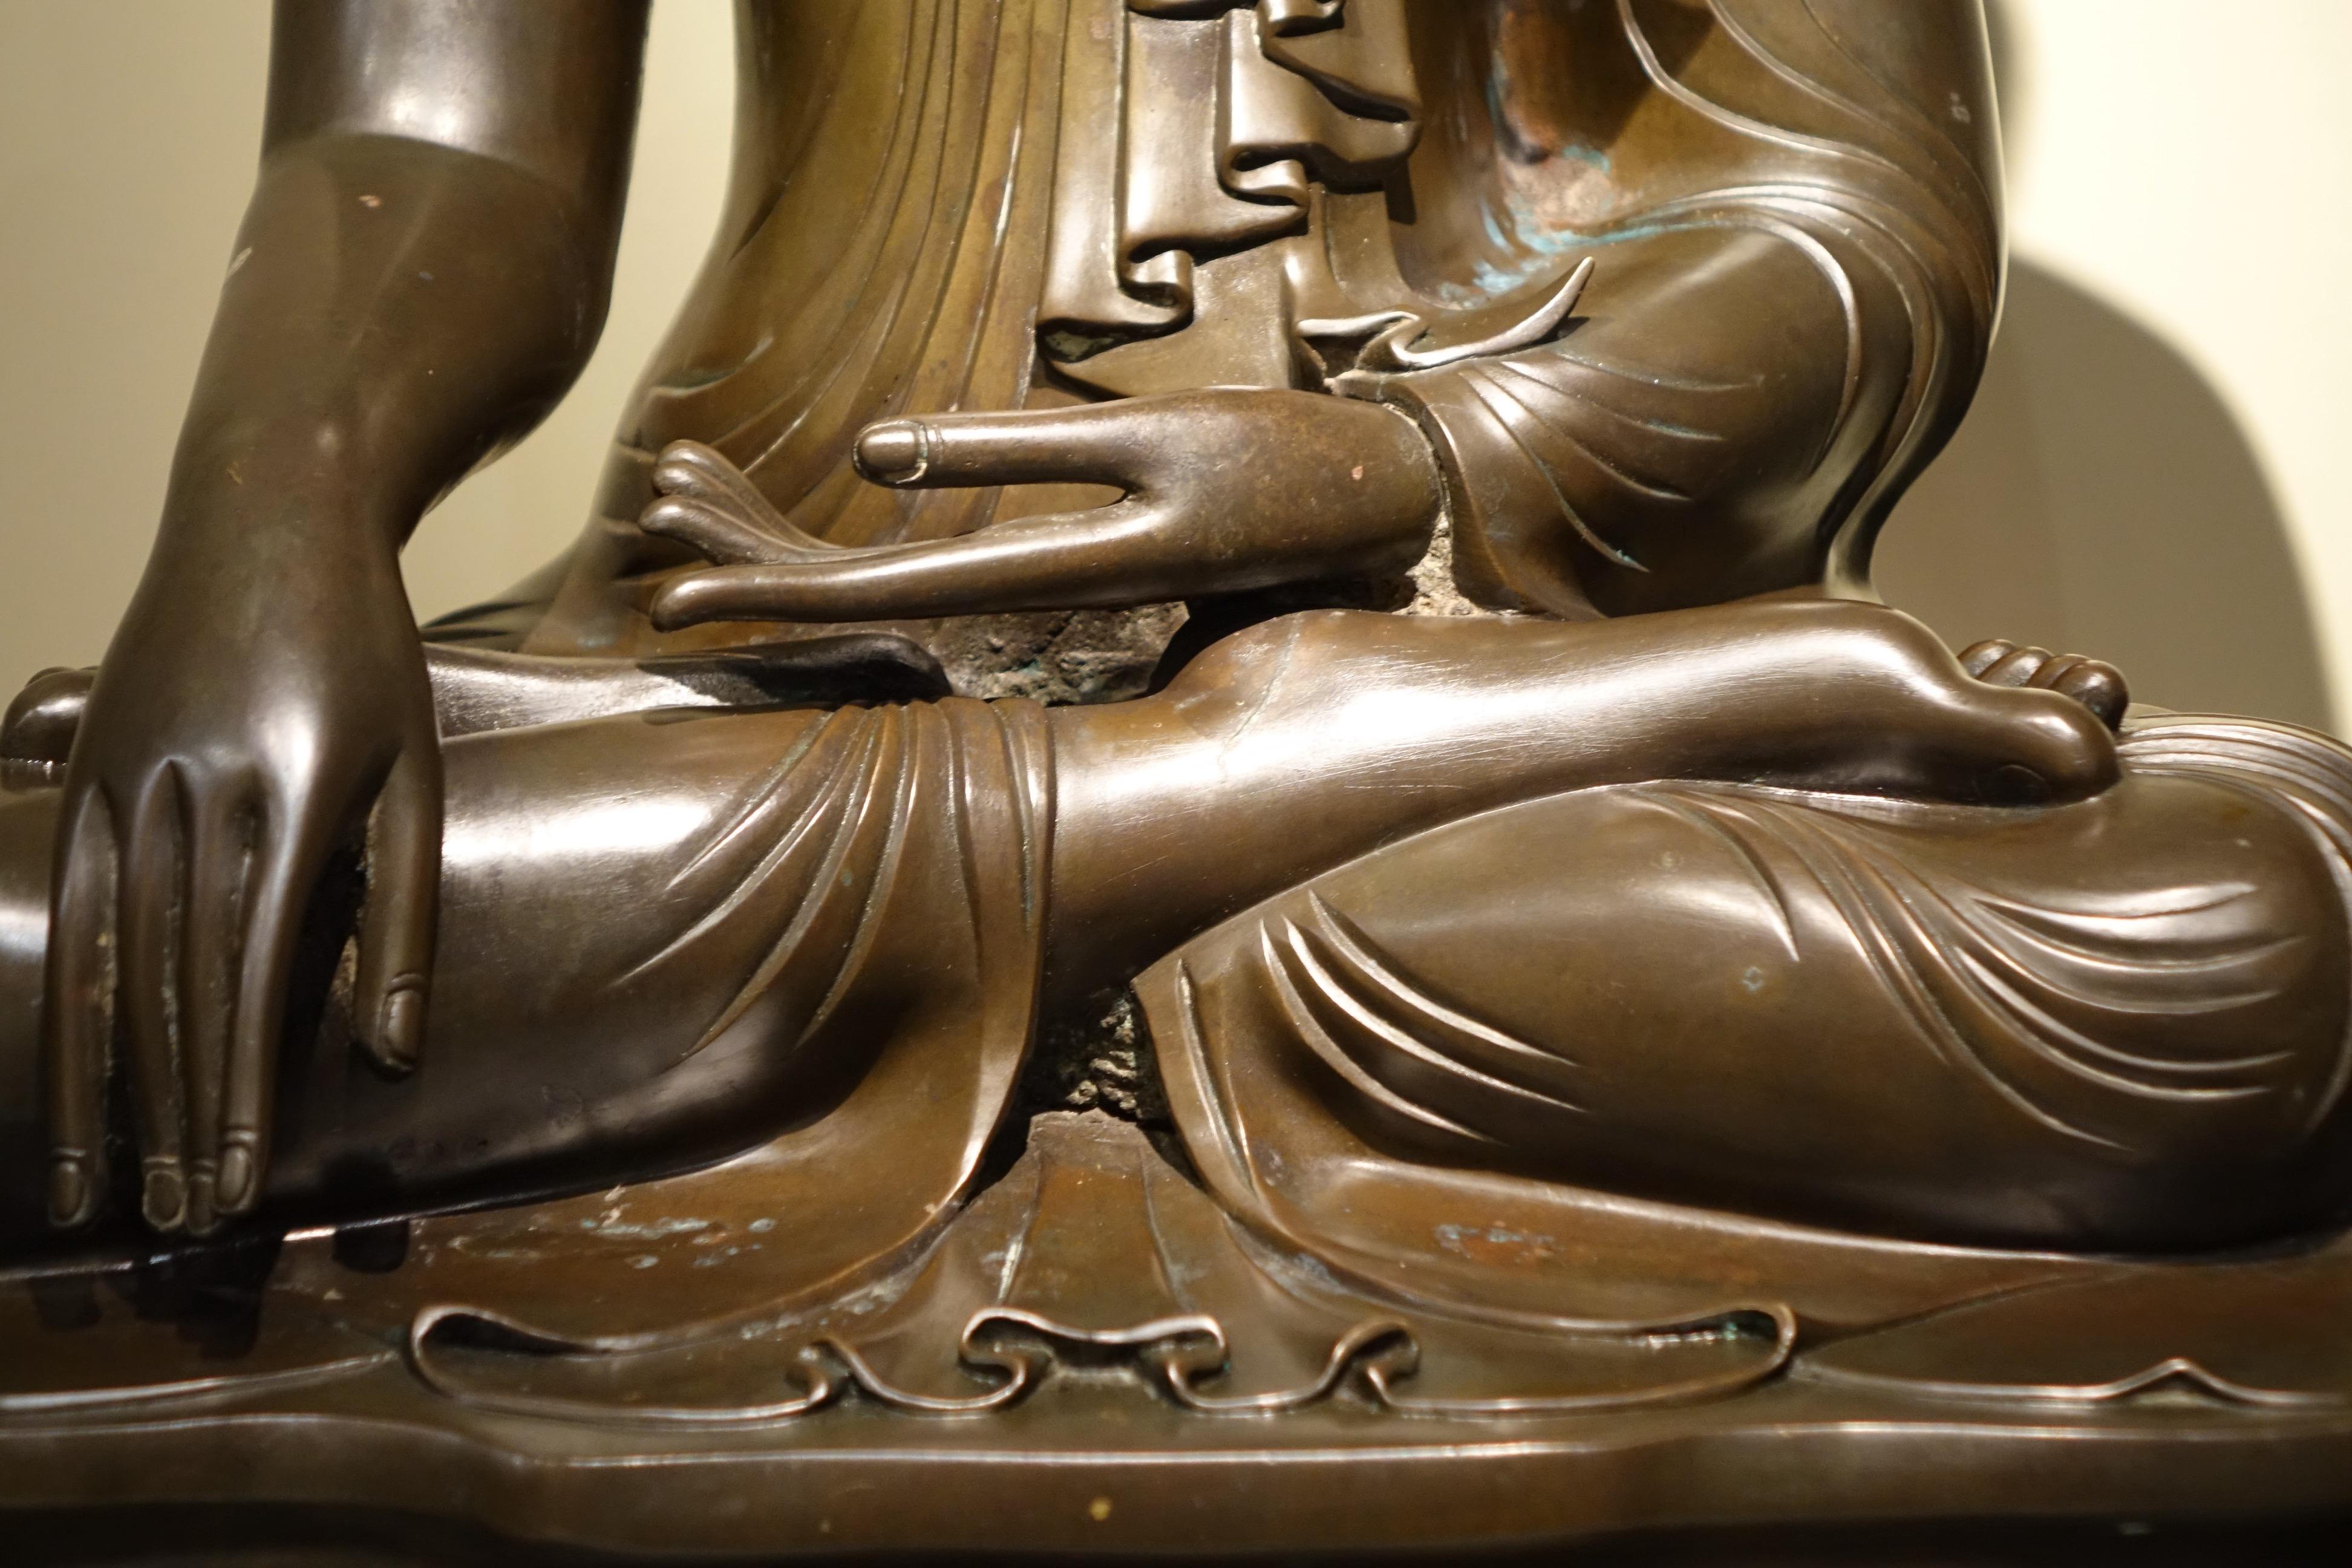 Buddha sitting in Bhumisparsa mùdra (or earth witness mudra )
Buddha calls the goddess of the earth to testify that he has definitively overcome the fears and temptations sent by Mara, the demon of illusion. He thus attains enlightenment under the